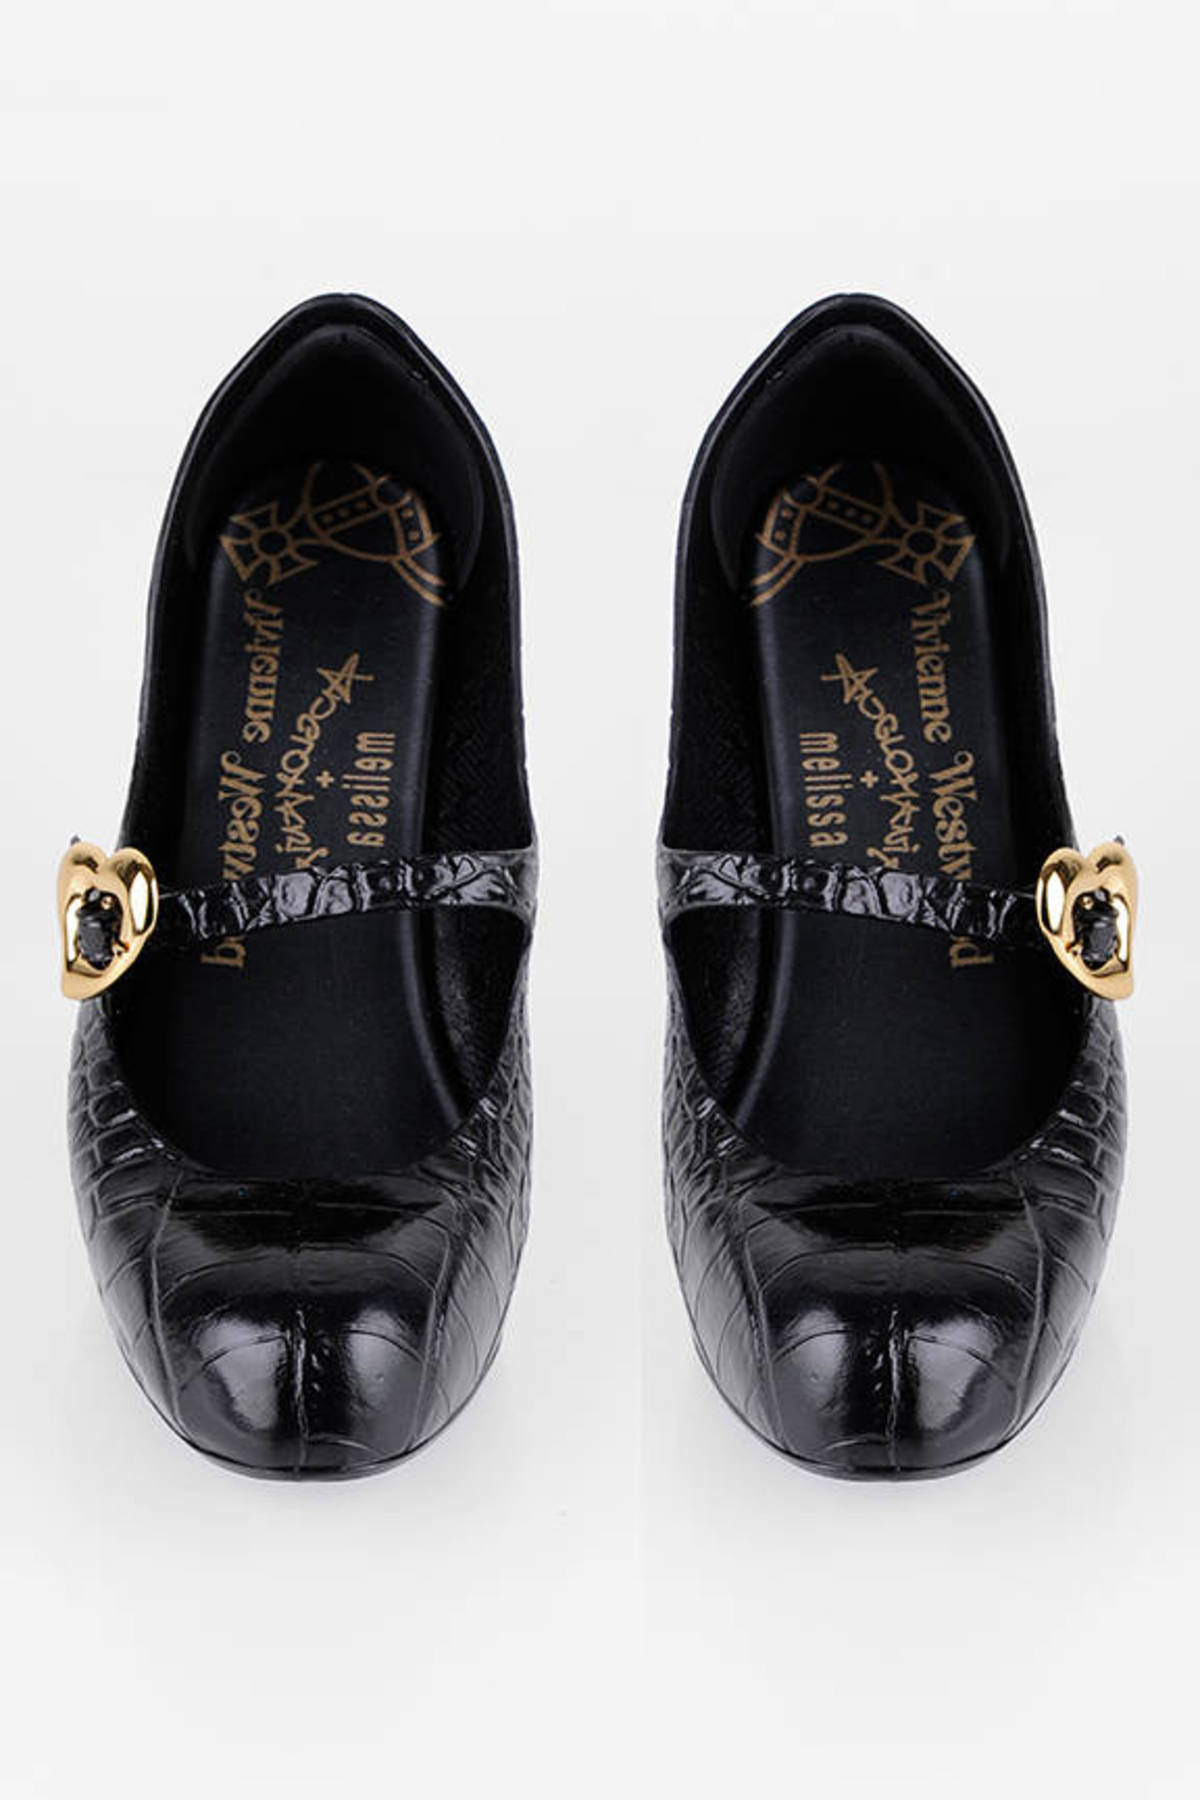 Vivienne Westwood Anglomania x Melissa Croco Mary Janes in Black - $93 ...